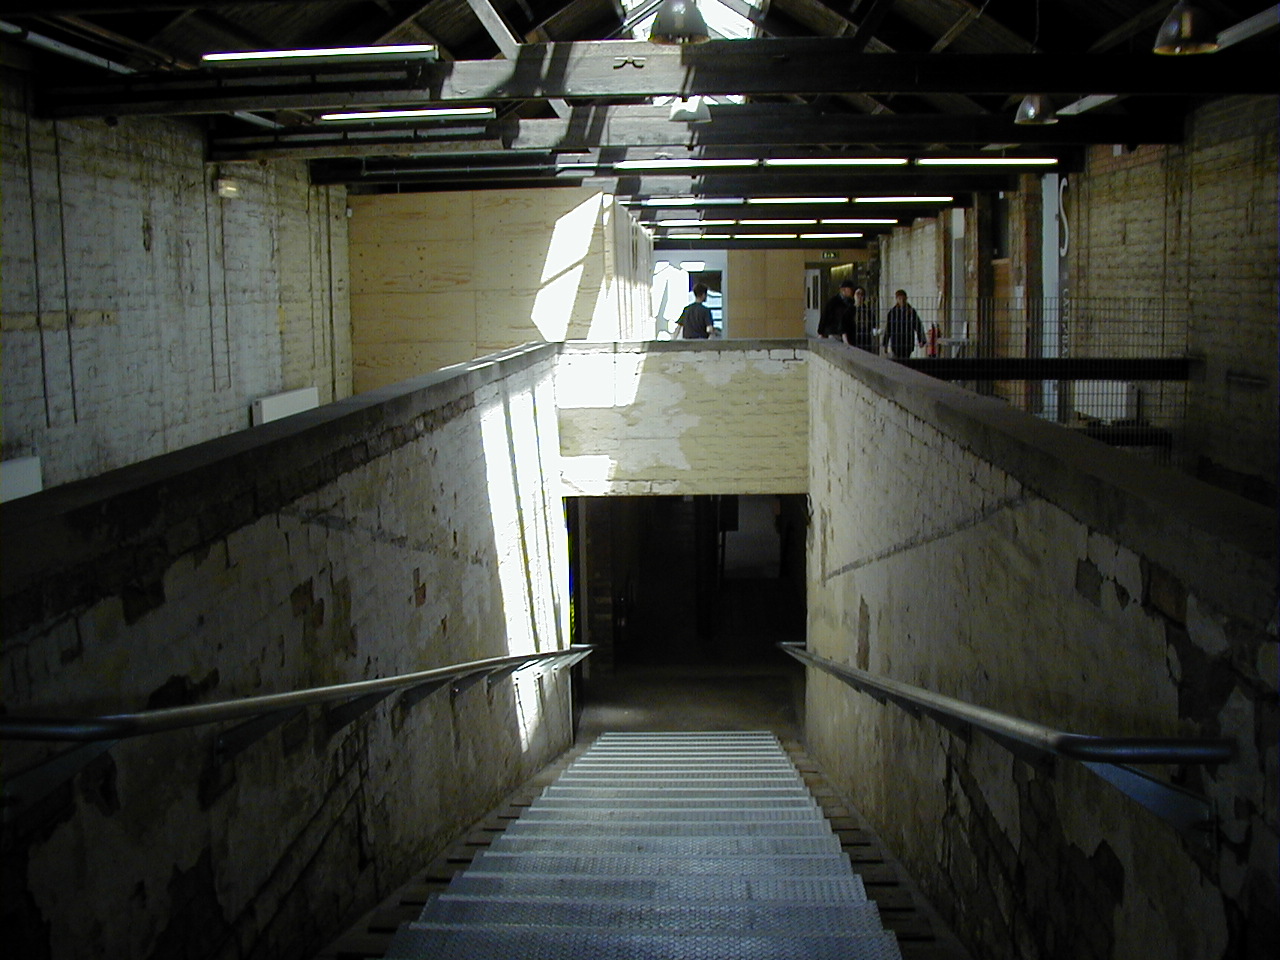 a long narrow staircase leading up to a ceiling in a building